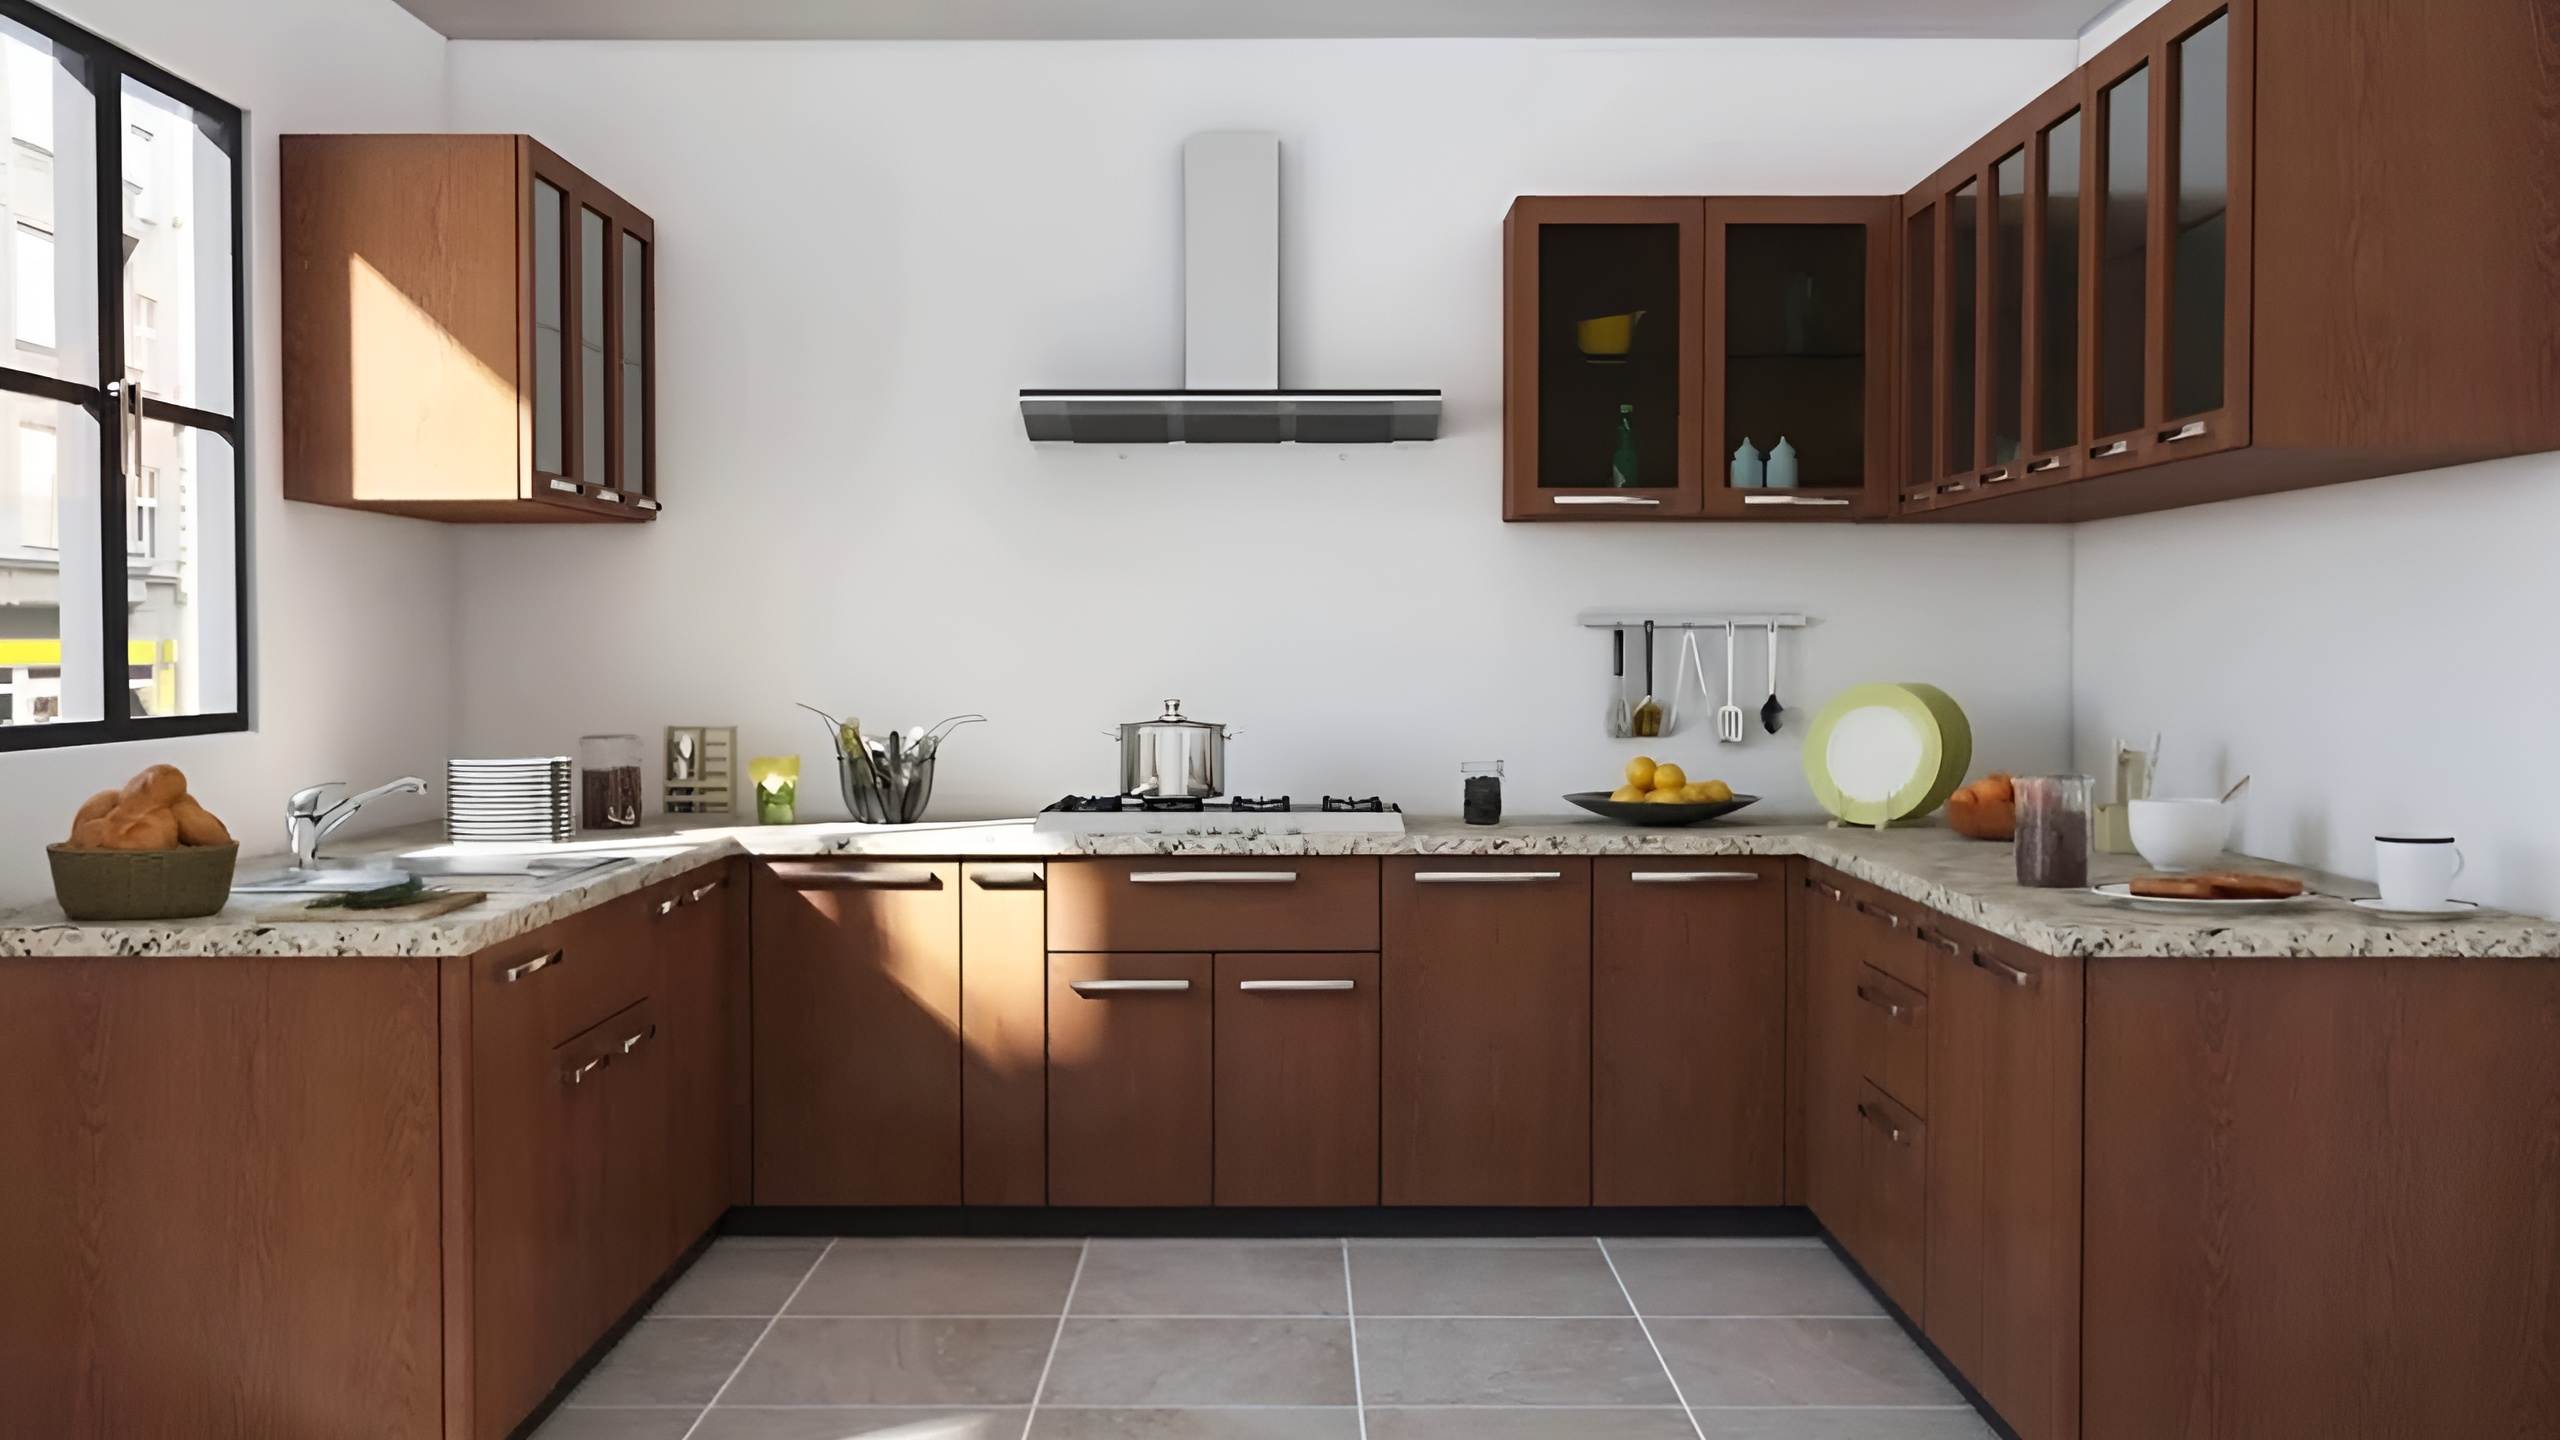 u shaped kitchen design with brown cabinets, cupboards and appliances